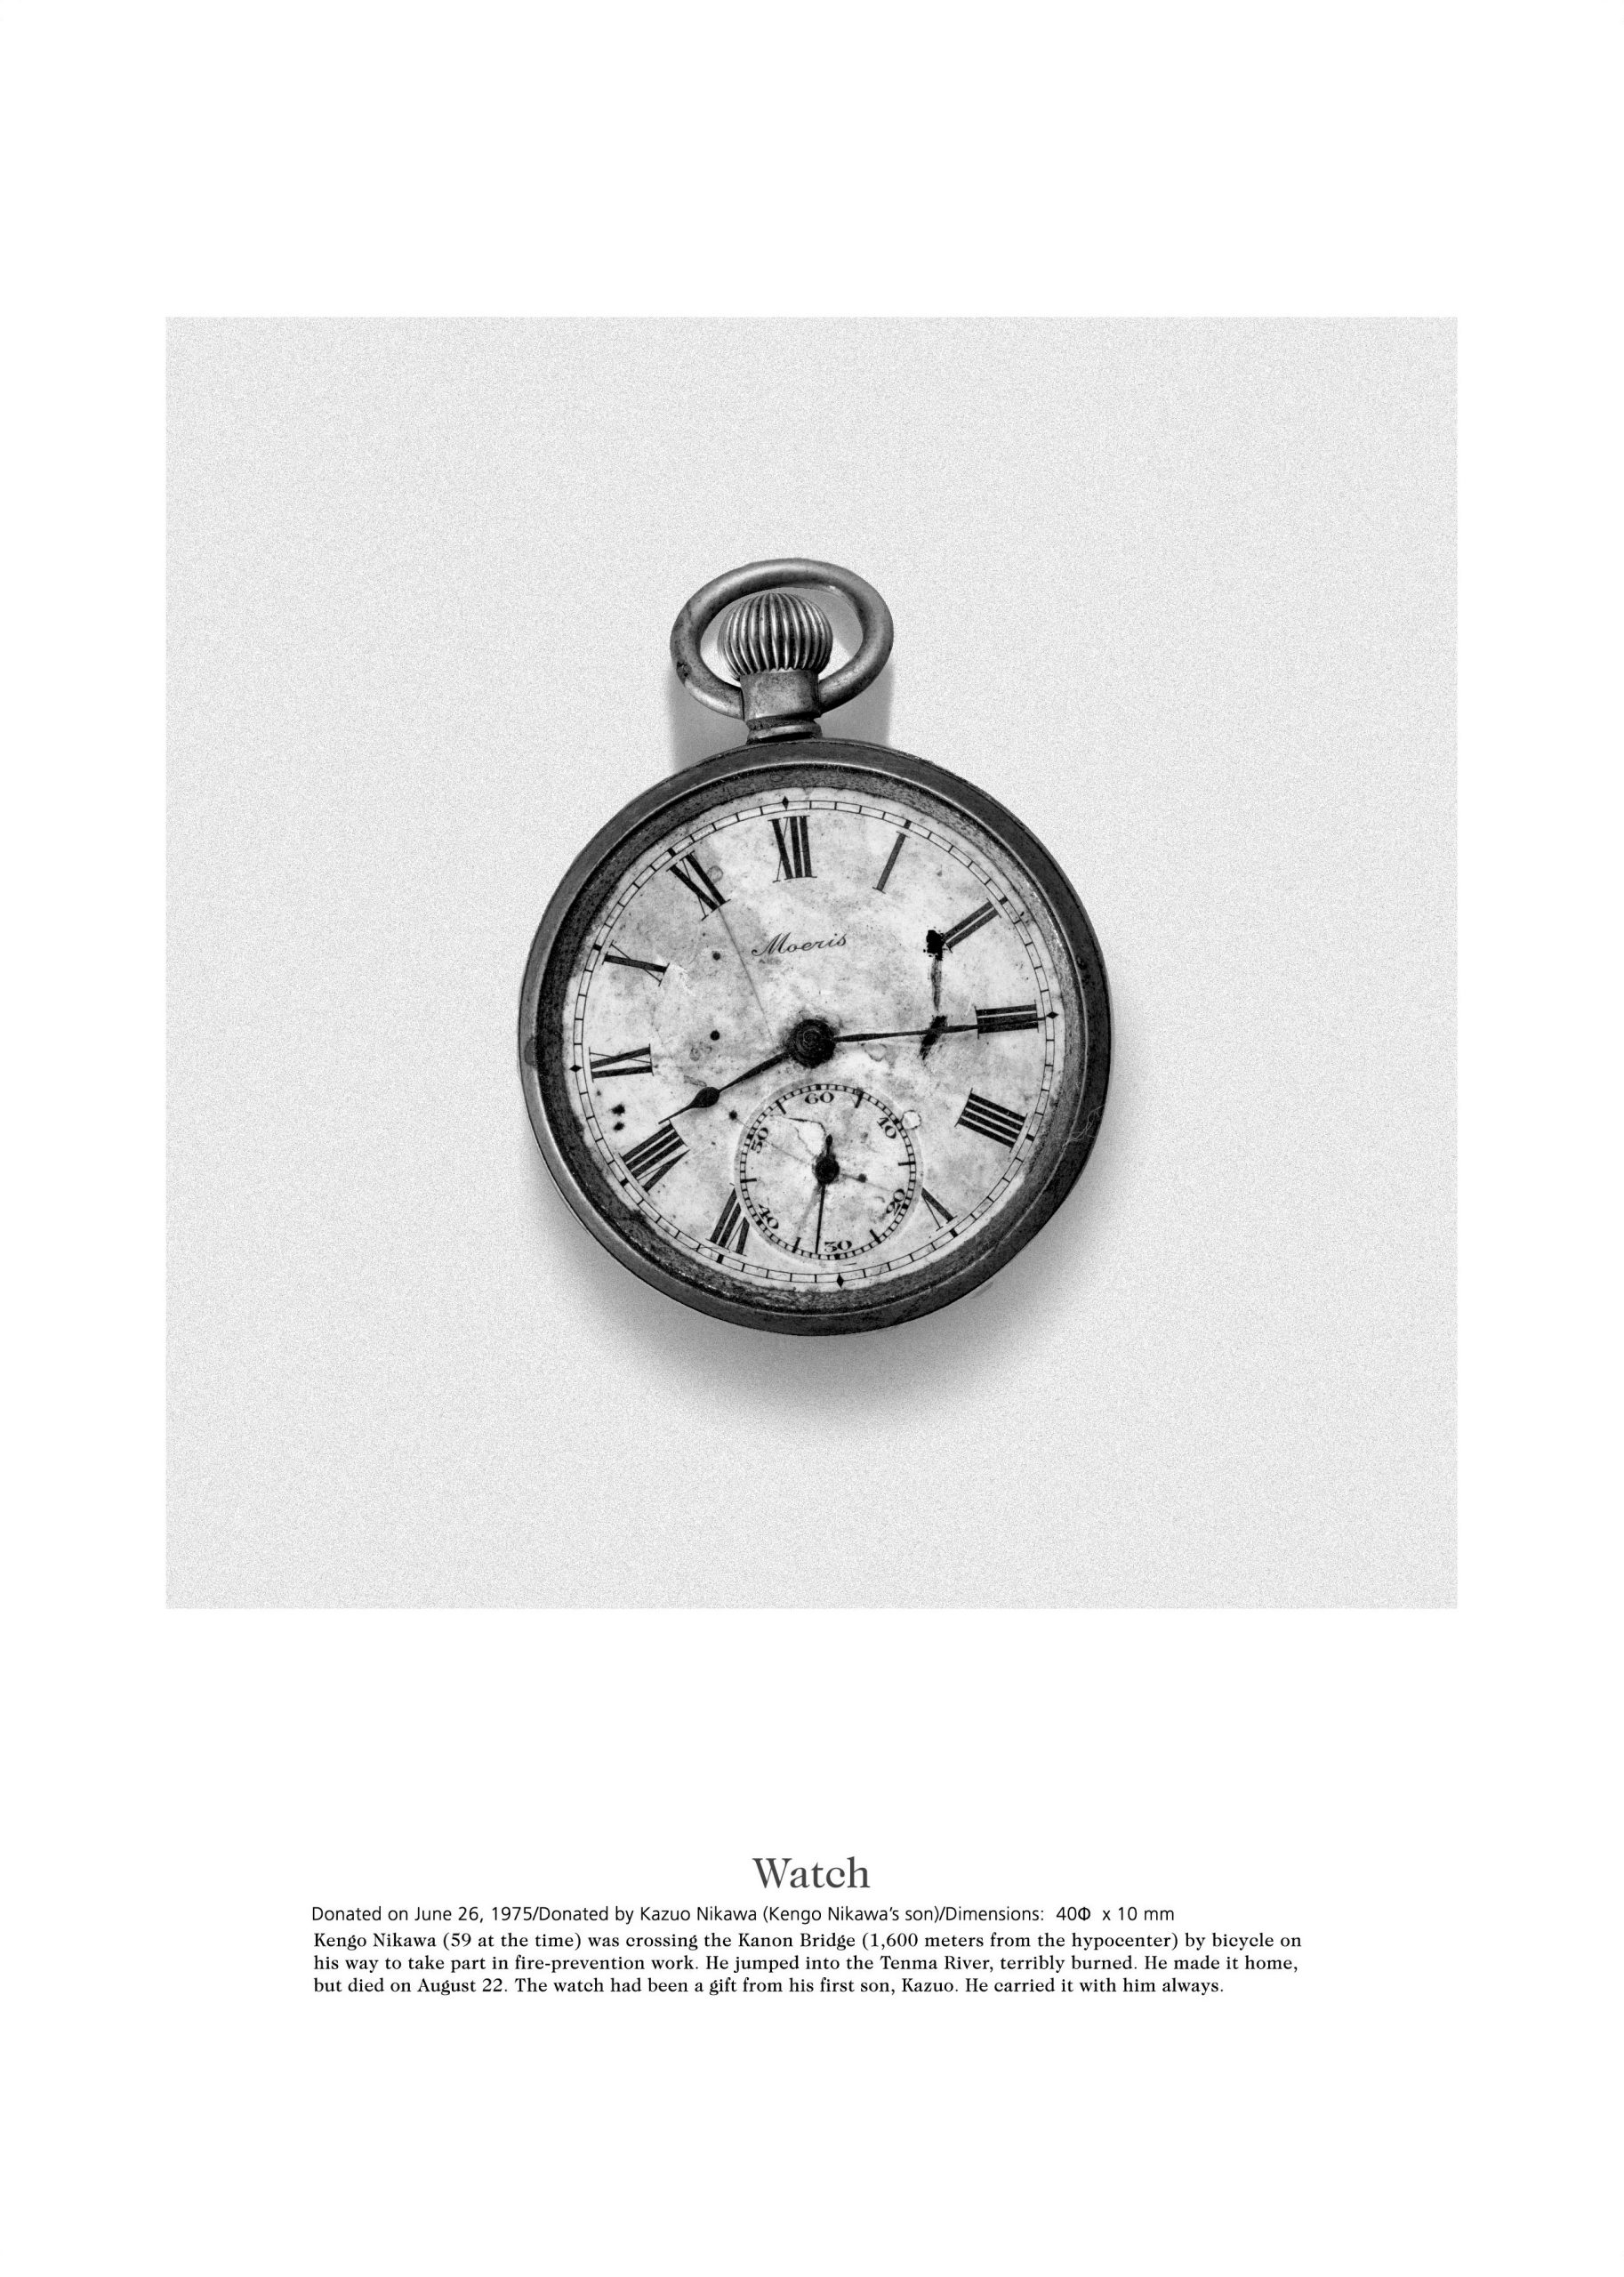 "Watch," by photographer Hiromi Tsuchida. A B-29 aircraft dropped the atom bomb on Hiroshima at 8:15 a.m. local time. The blast stopped a man's pocket watch, registering the moment precisely. The man did not survive.